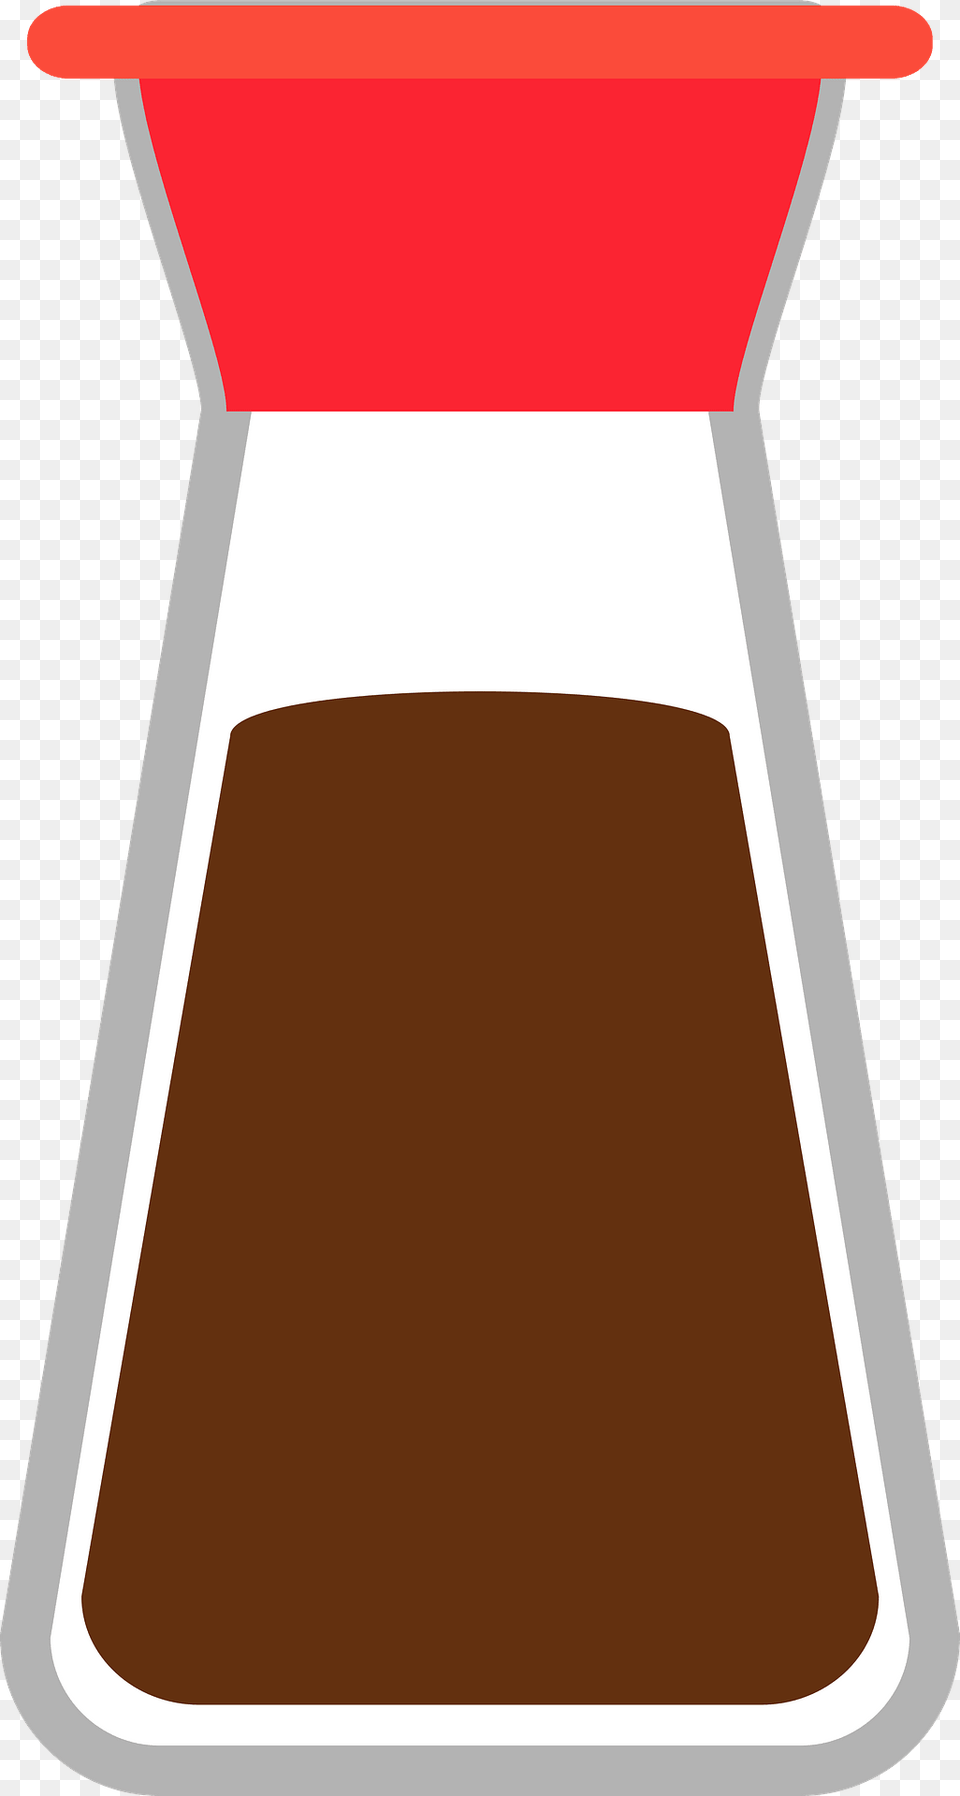 Soy Sauce Clipart Png Image